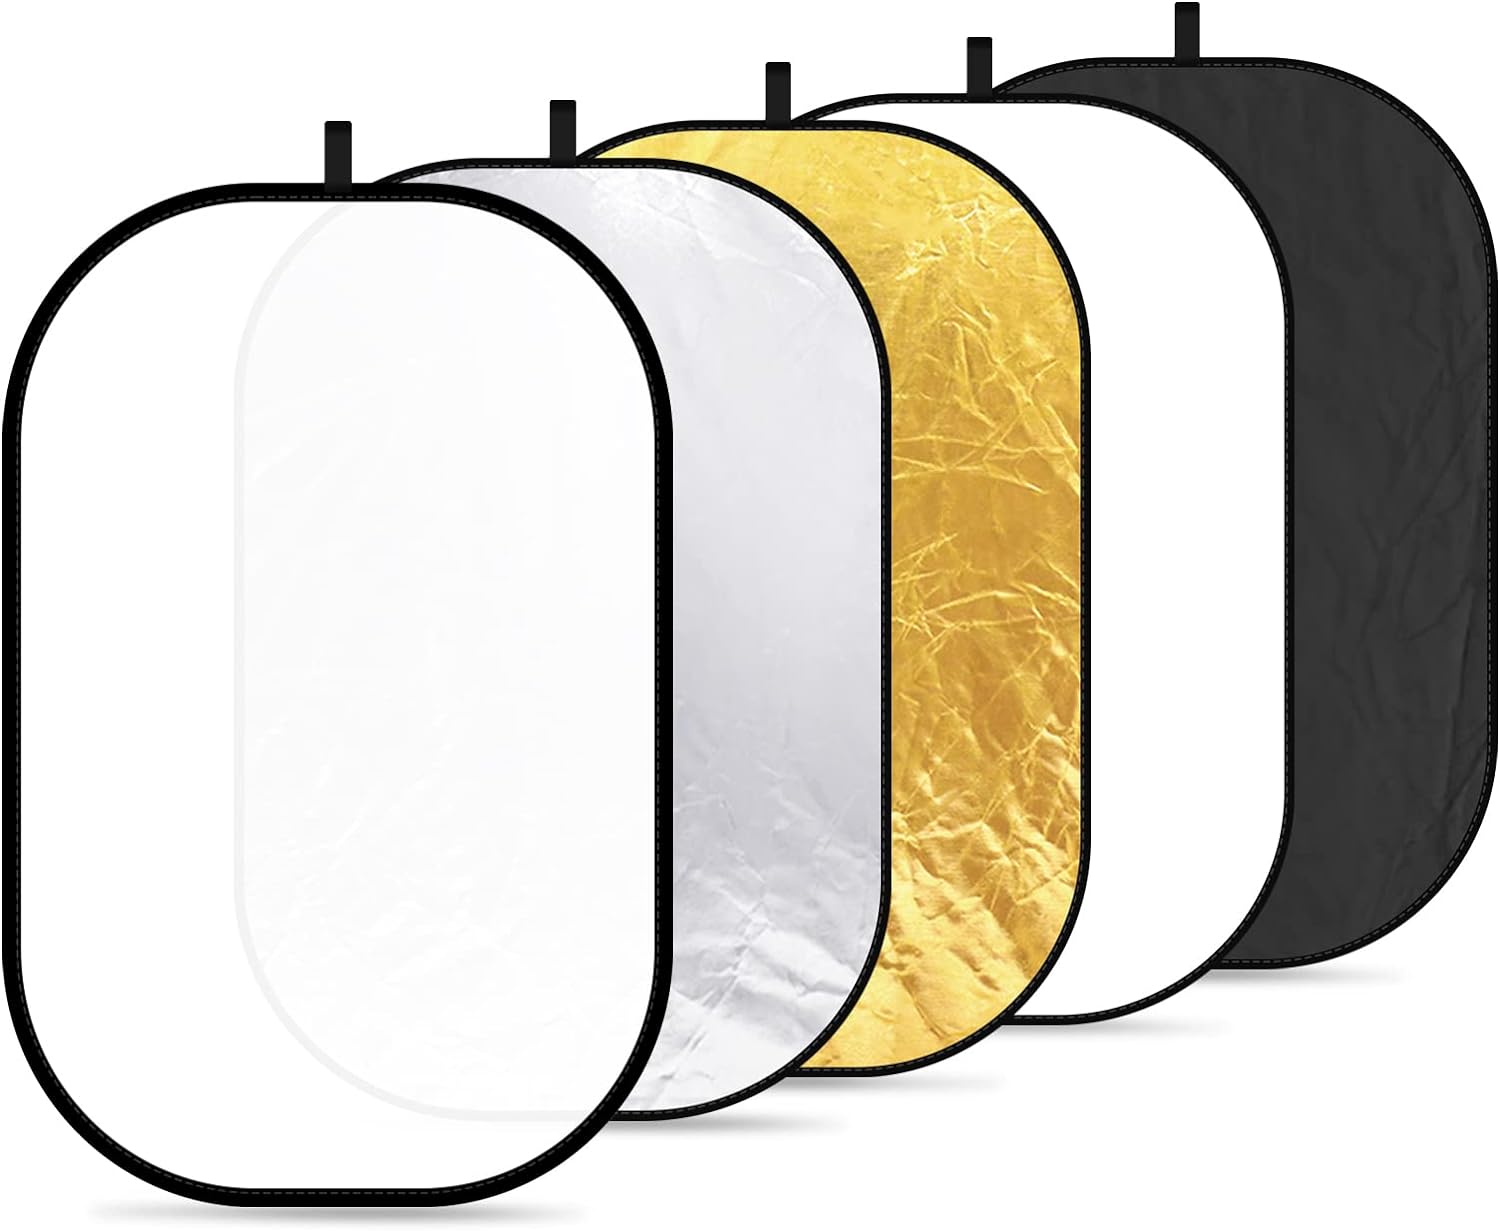 5-in-1 Collapsible Light Reflector